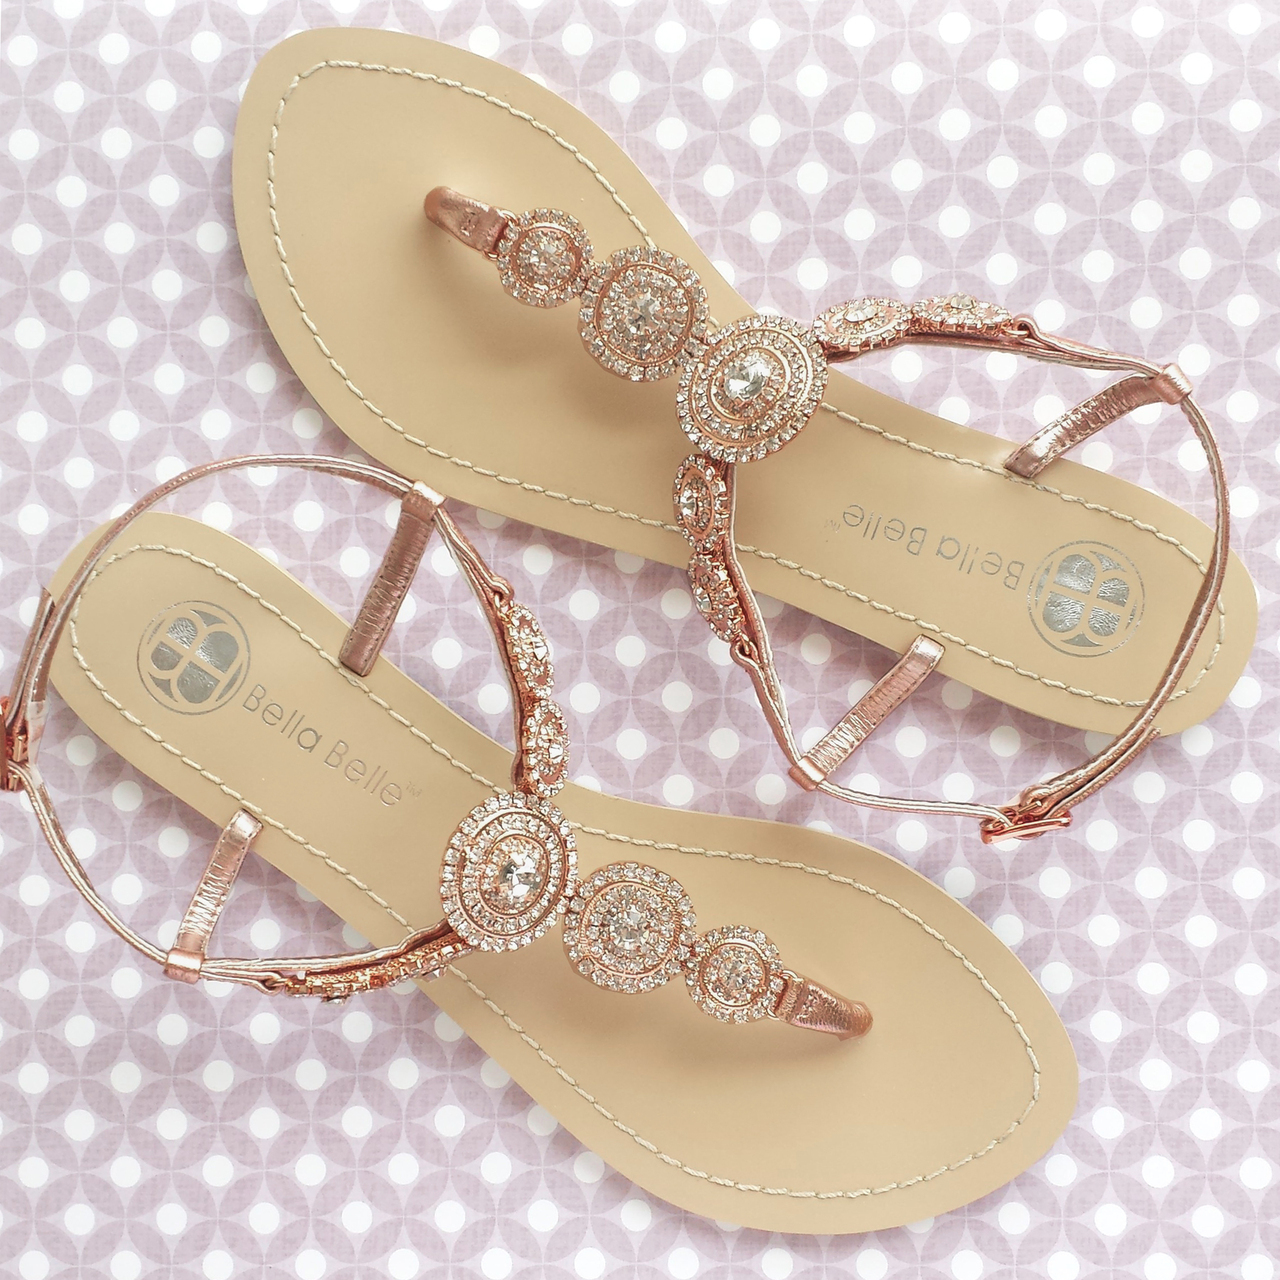 ... Strappy Rose Gold Bridal Thong Sandals Shoes Destination Beach Wedding